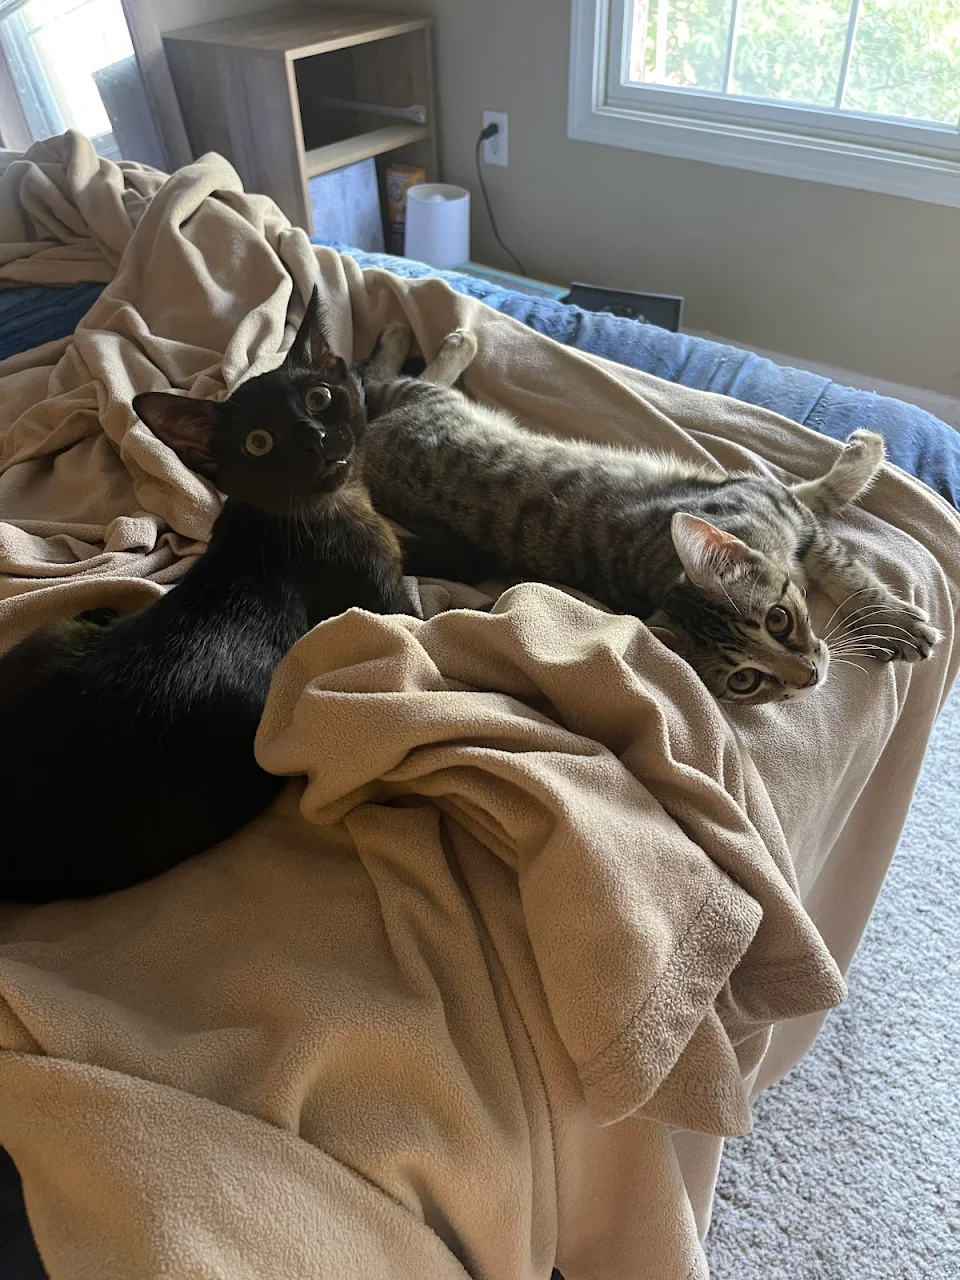 Last picture of my foster kittens that I took last night before they got adopted…I’m so happy they’ve found a permanent home but I had no idea giving them up would be this hard 😢